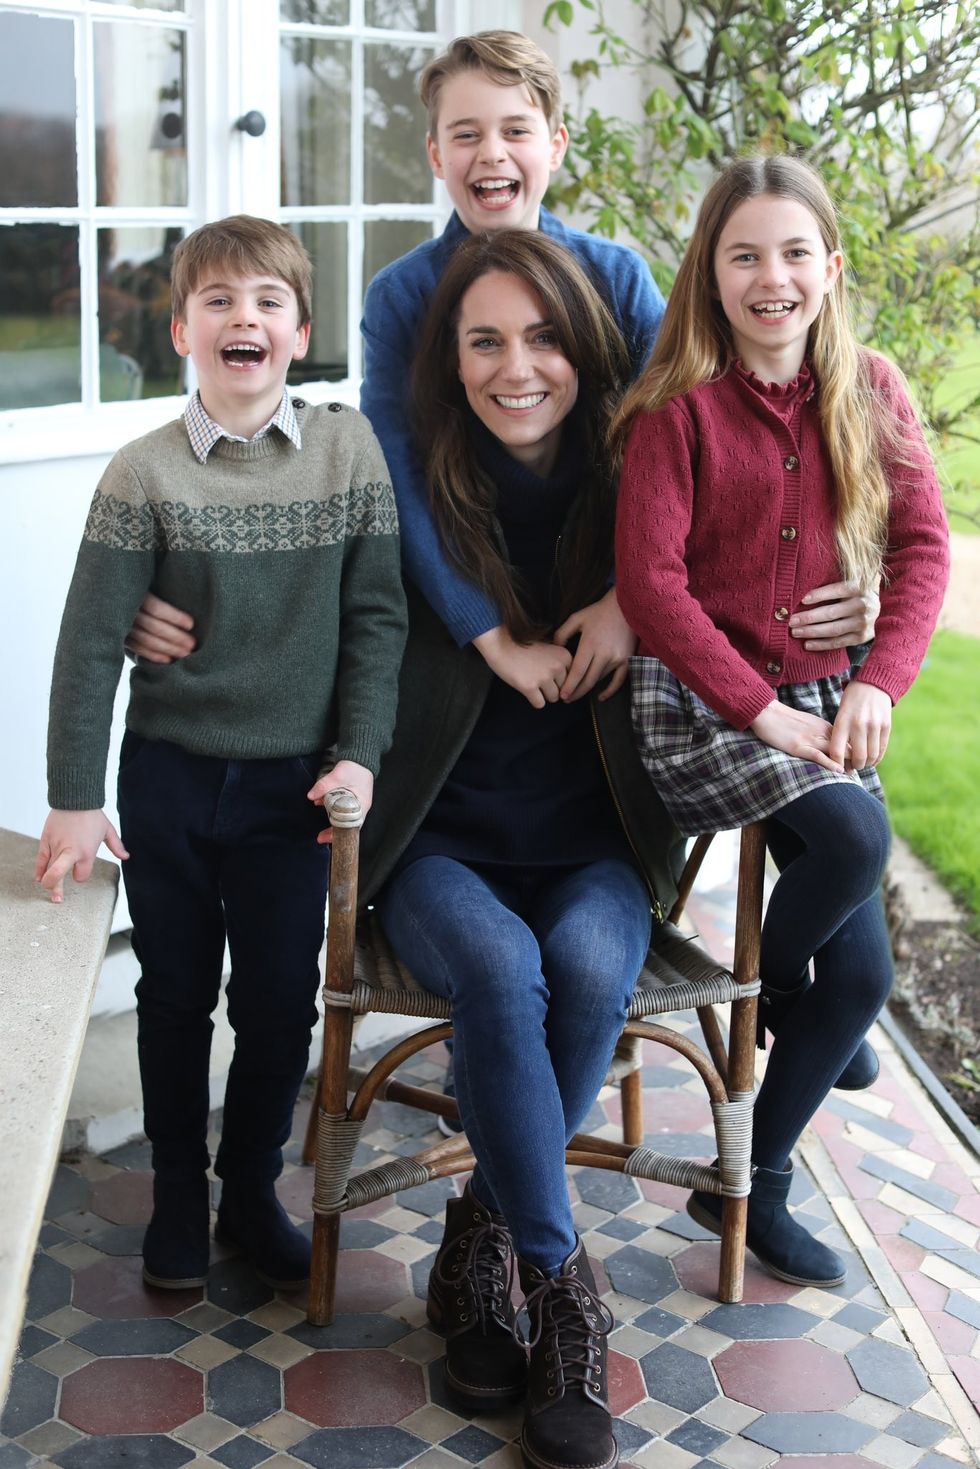 Princess Kate and her children